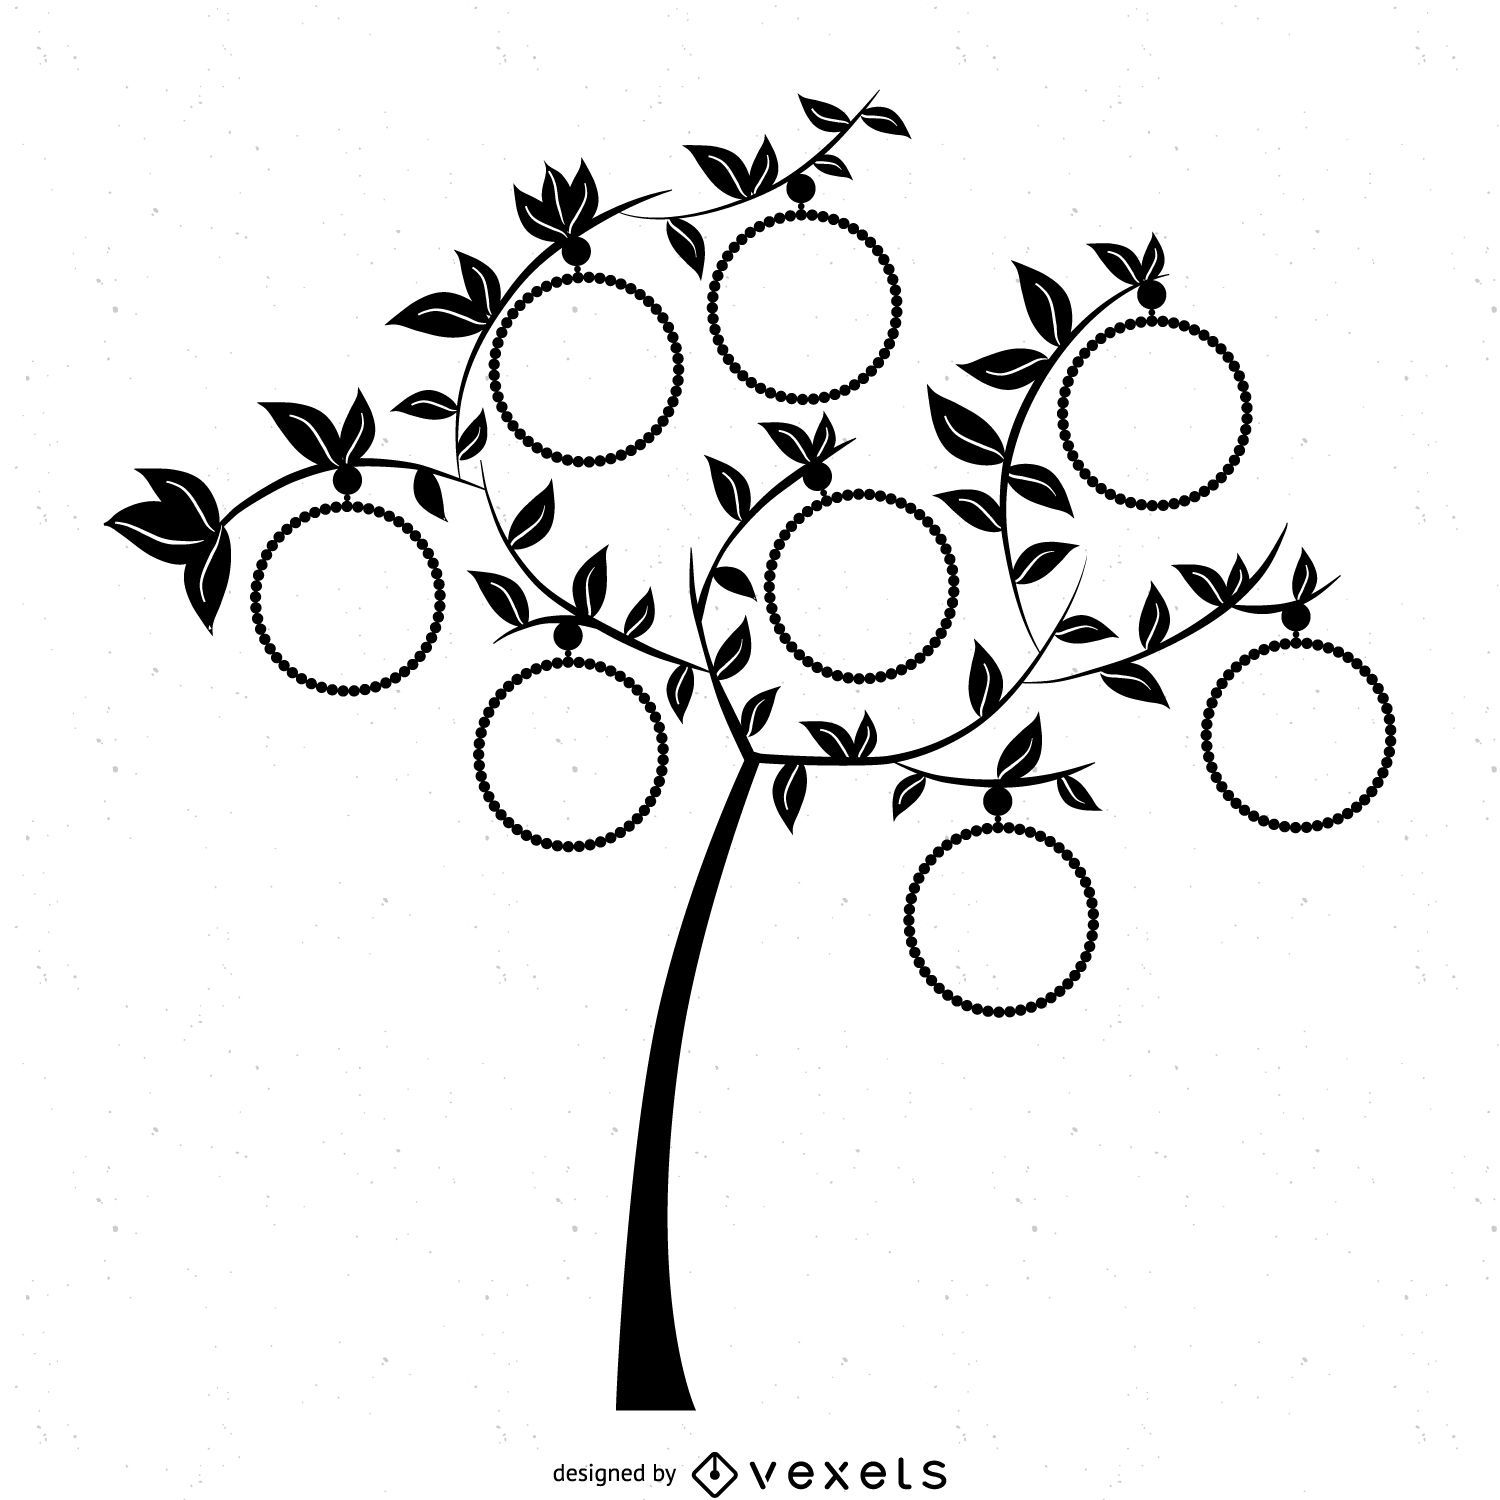 Family tree template with frames